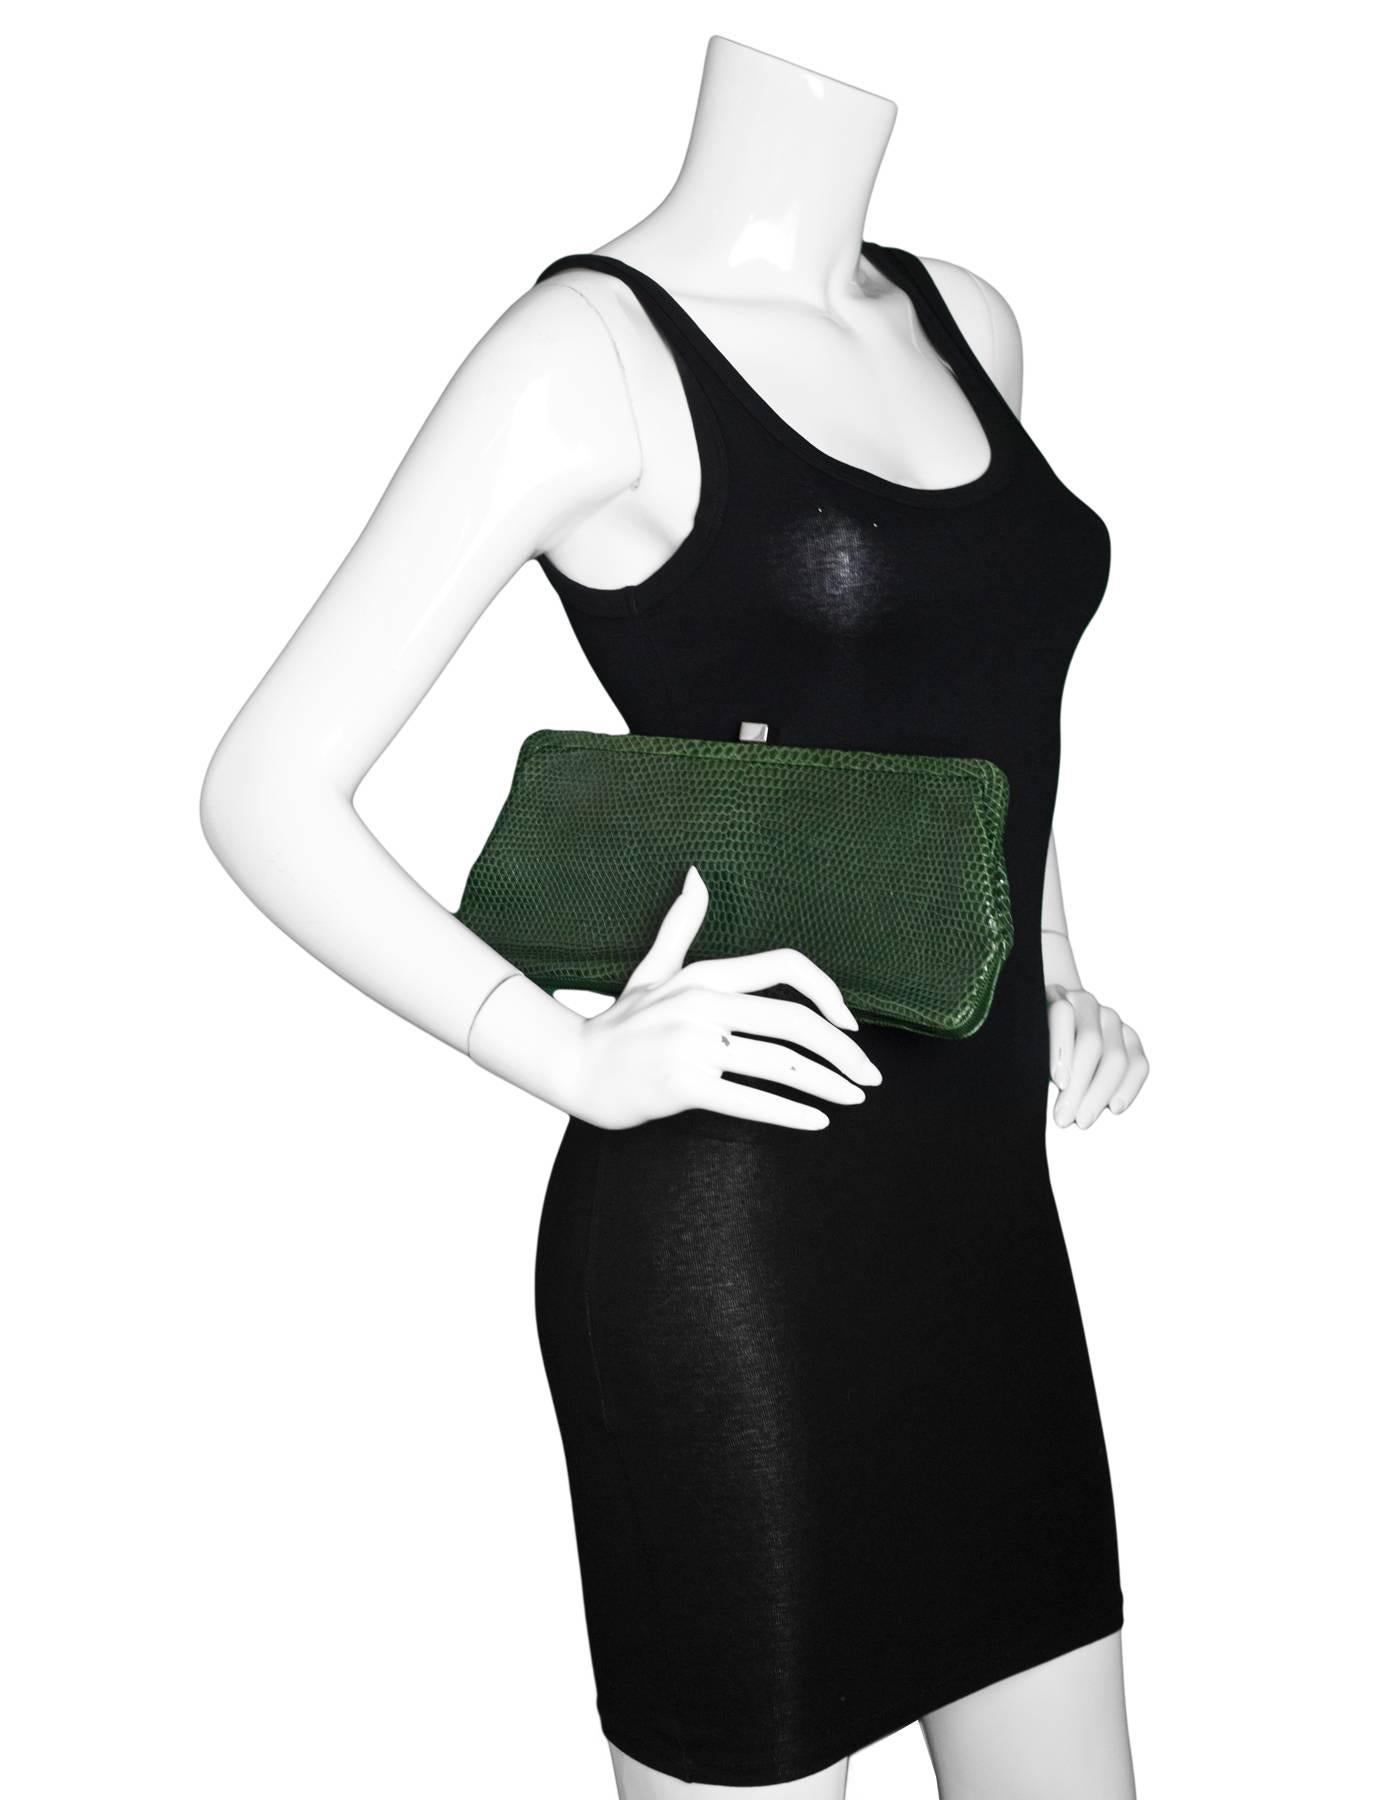 Lambertson Truex Green Lizard Clutch 

Made In: South Africa
Color: Green
Hardware: Silvertone
Materials: Lizard, metal
Lining: Blue textile
Closure/Opening: Frame top with snap closure
Exterior Pockets: None
Interior Pockets: One zip pocket
Retail